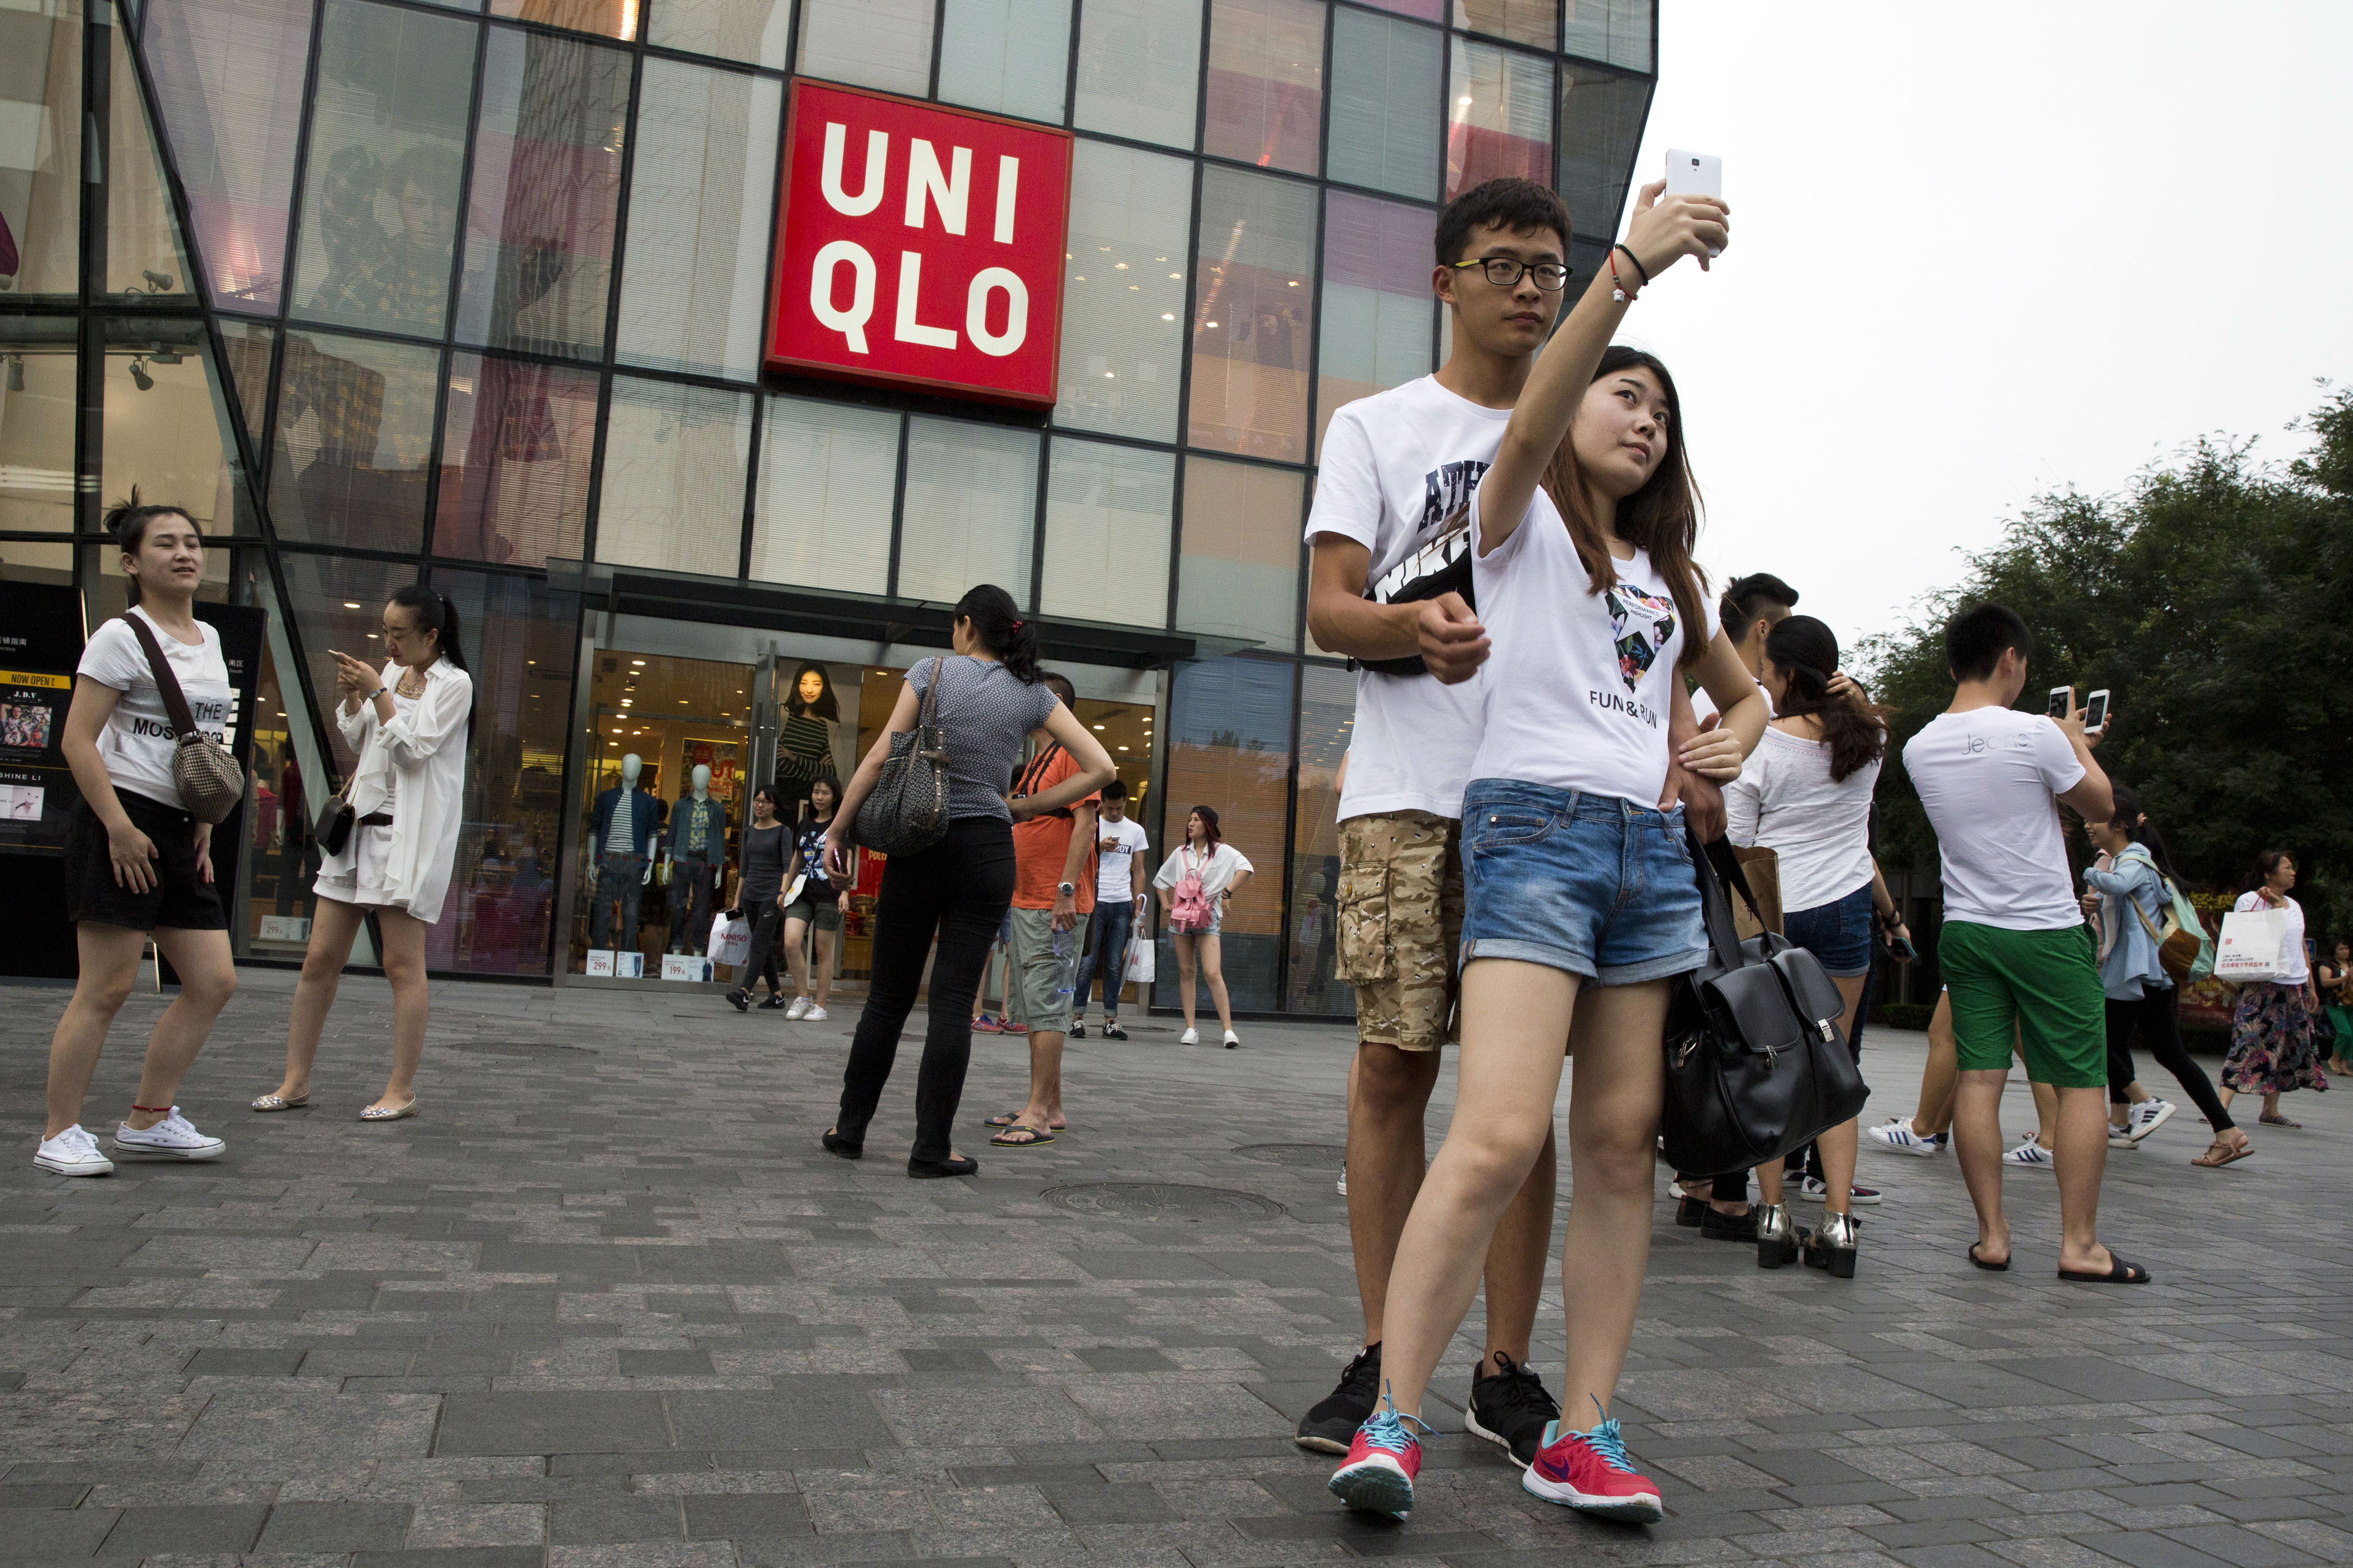 Beijing Arrests Five in Connection With Alleged Uniqlo Sex Tape Time